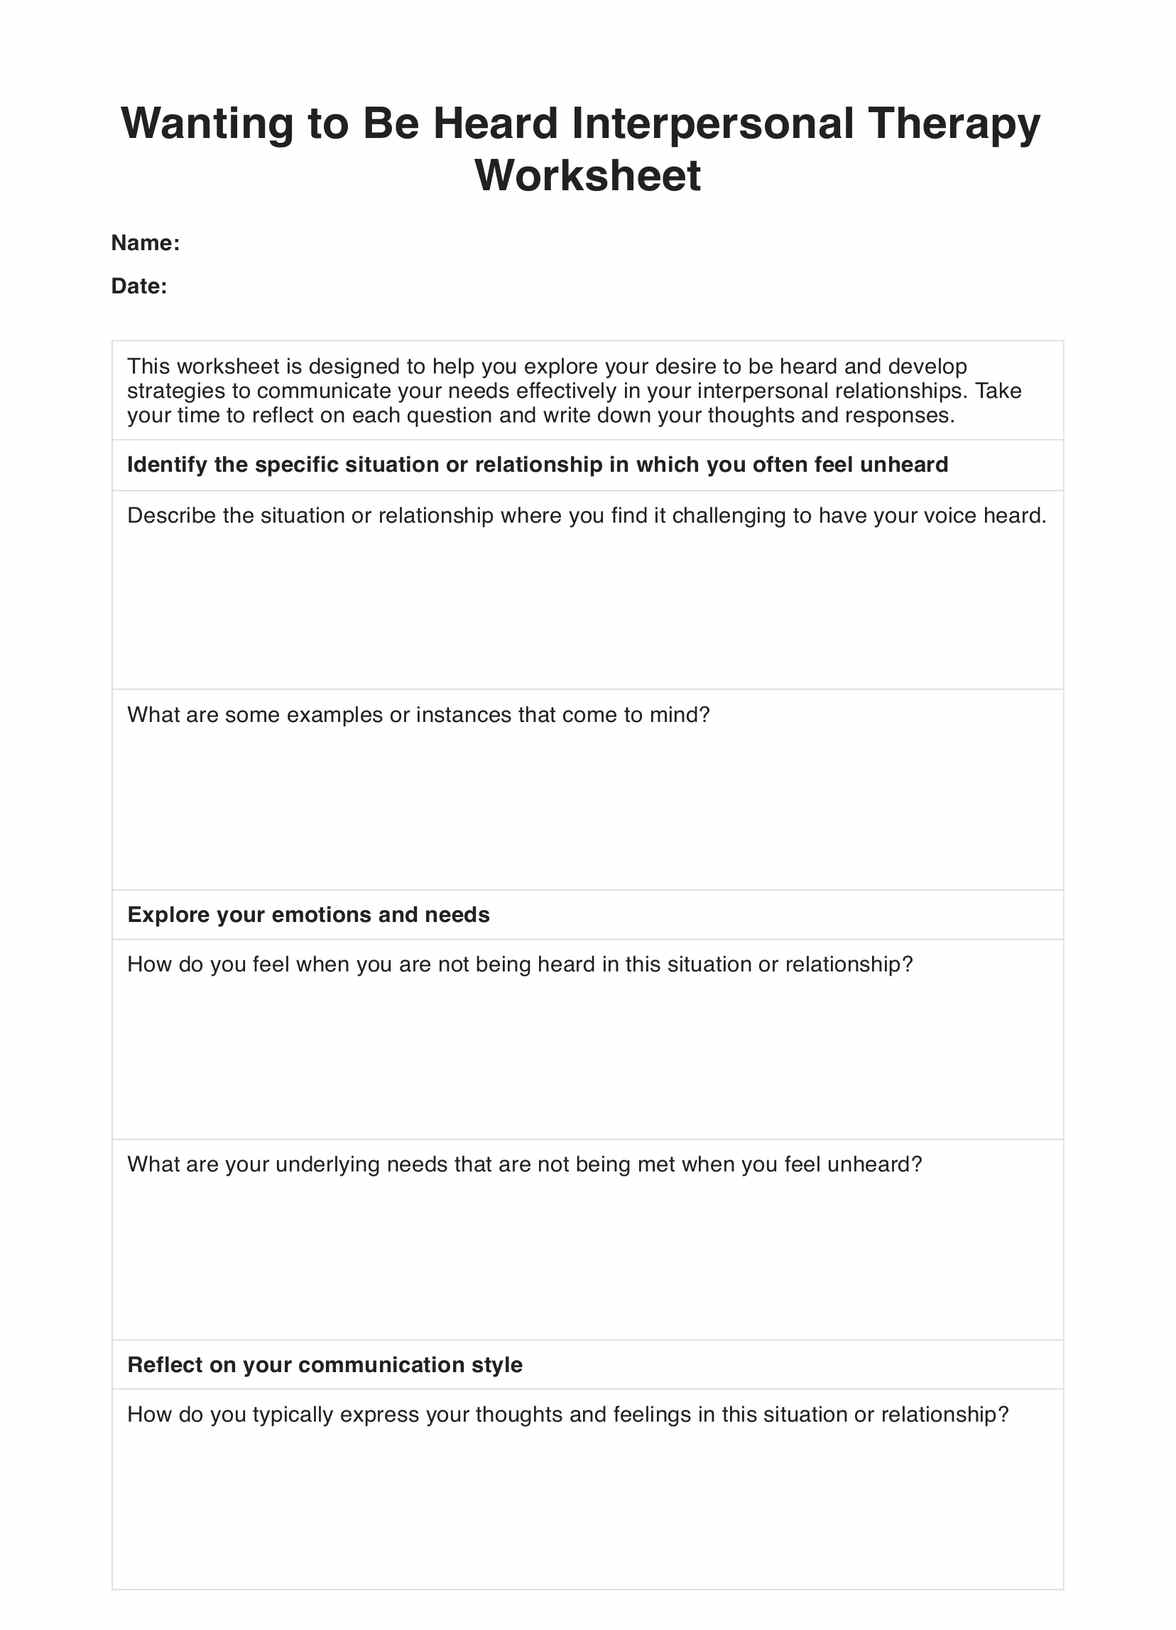 Wanting to be Heard Interpersonal Therapy Worksheet PDF Example